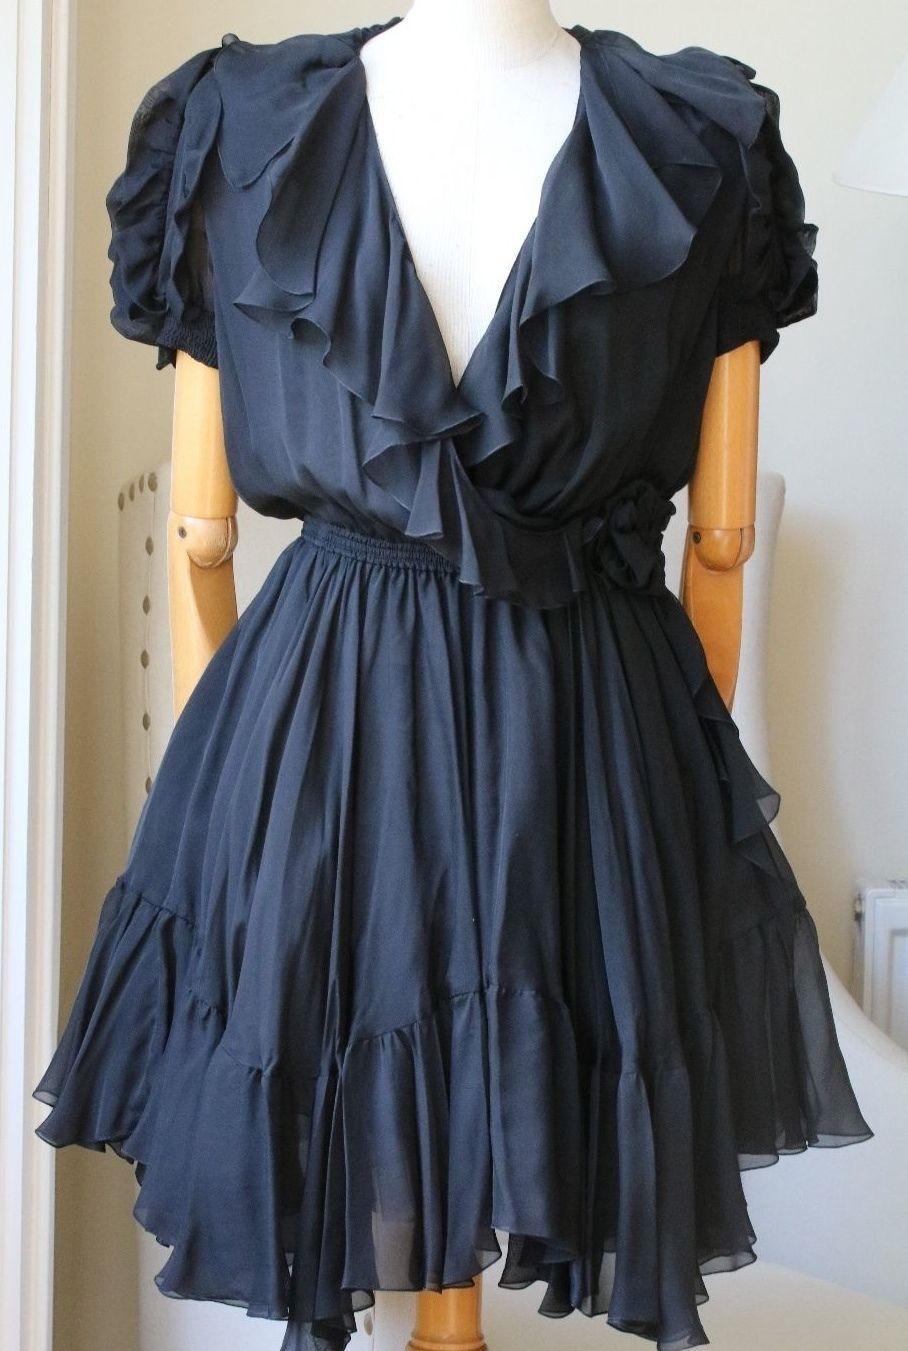 Faith Connexion silk puff shoulder dress features ruffles around the chest. 100% Silk. 

Size: Small (UK 8, US 4, IT 40, FR 36)

Condition: As new condition, no sign of wear. 
